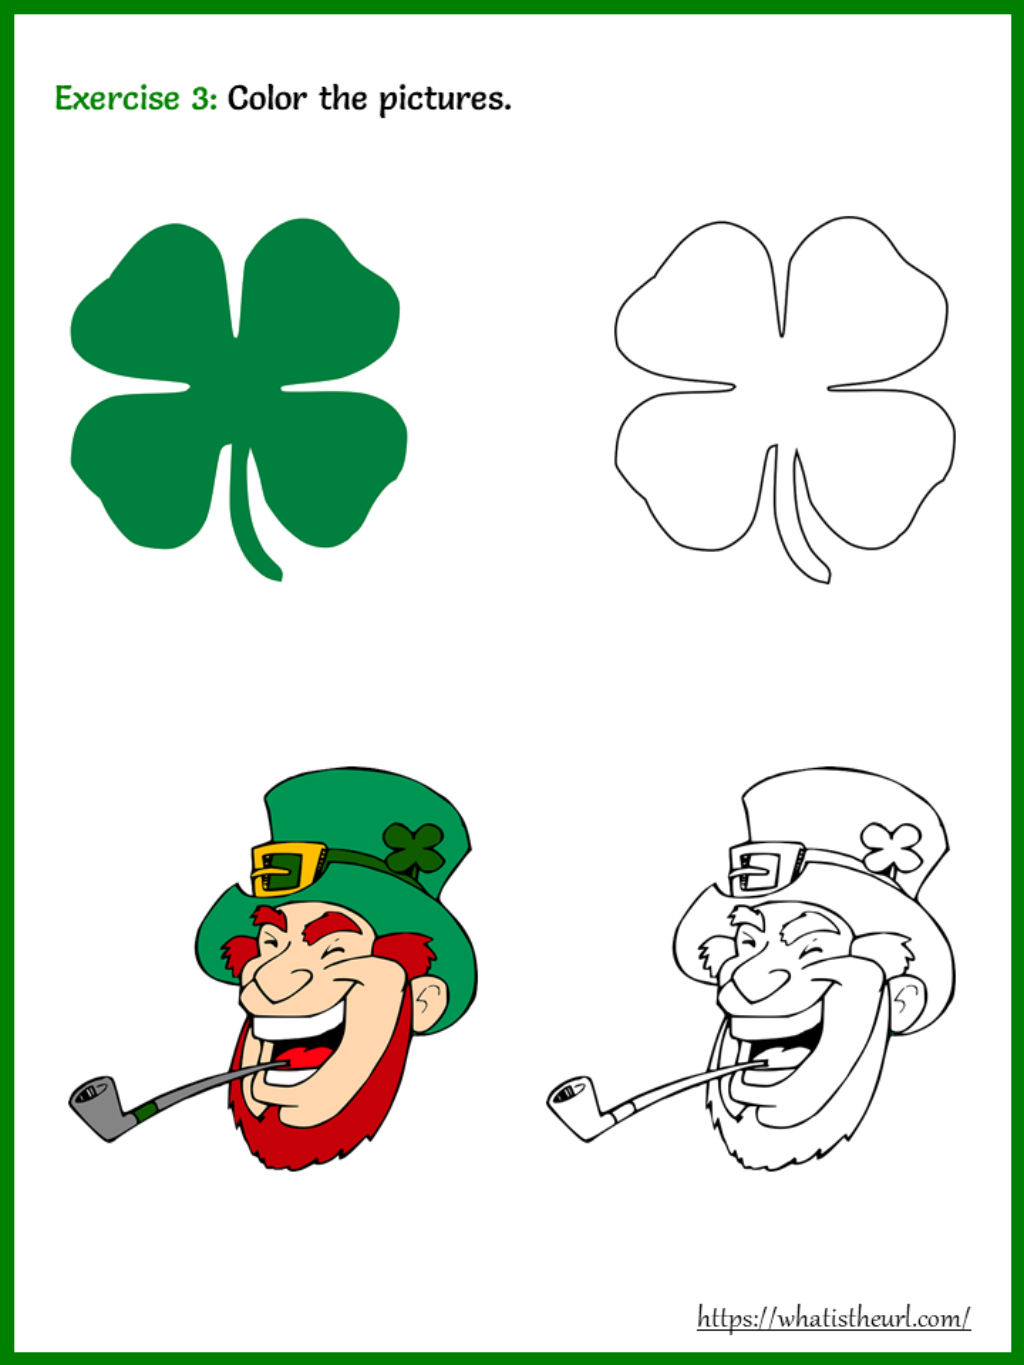 st-patrick-s-day-coloring-worksheet-your-home-teacher